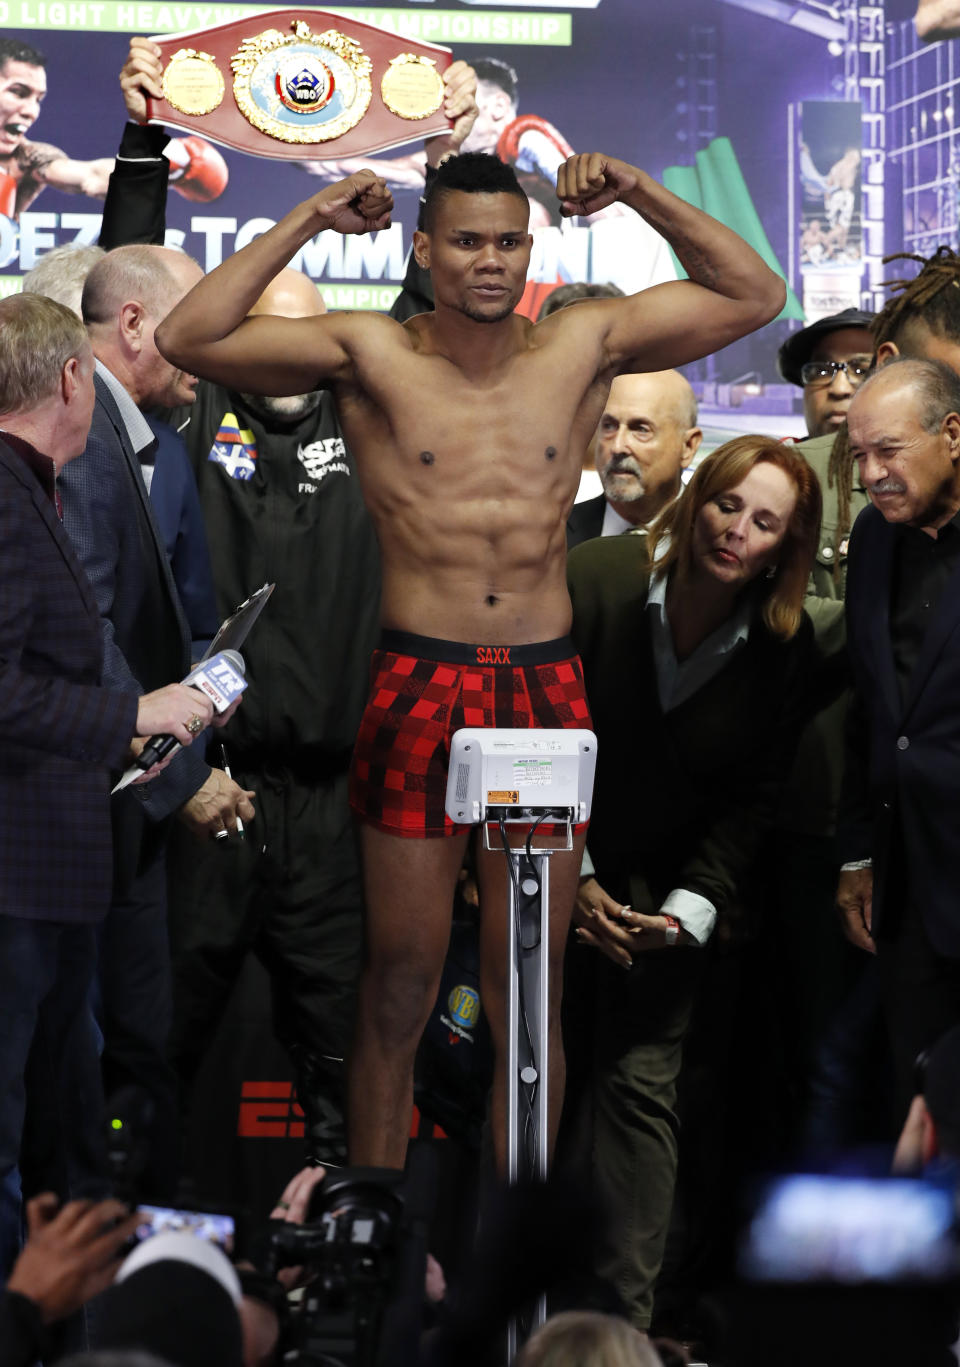 Eleider Alvarez, the WBO light heavyweight champion, poses during his weigh-in in Frisco, Texas, Friday, Feb. 1, 2019. Alvarez will put his title on the line Saturday night when he is scheduled to fight Sergey Kovalev of Russia. (AP Photo/Tony Gutierrez)